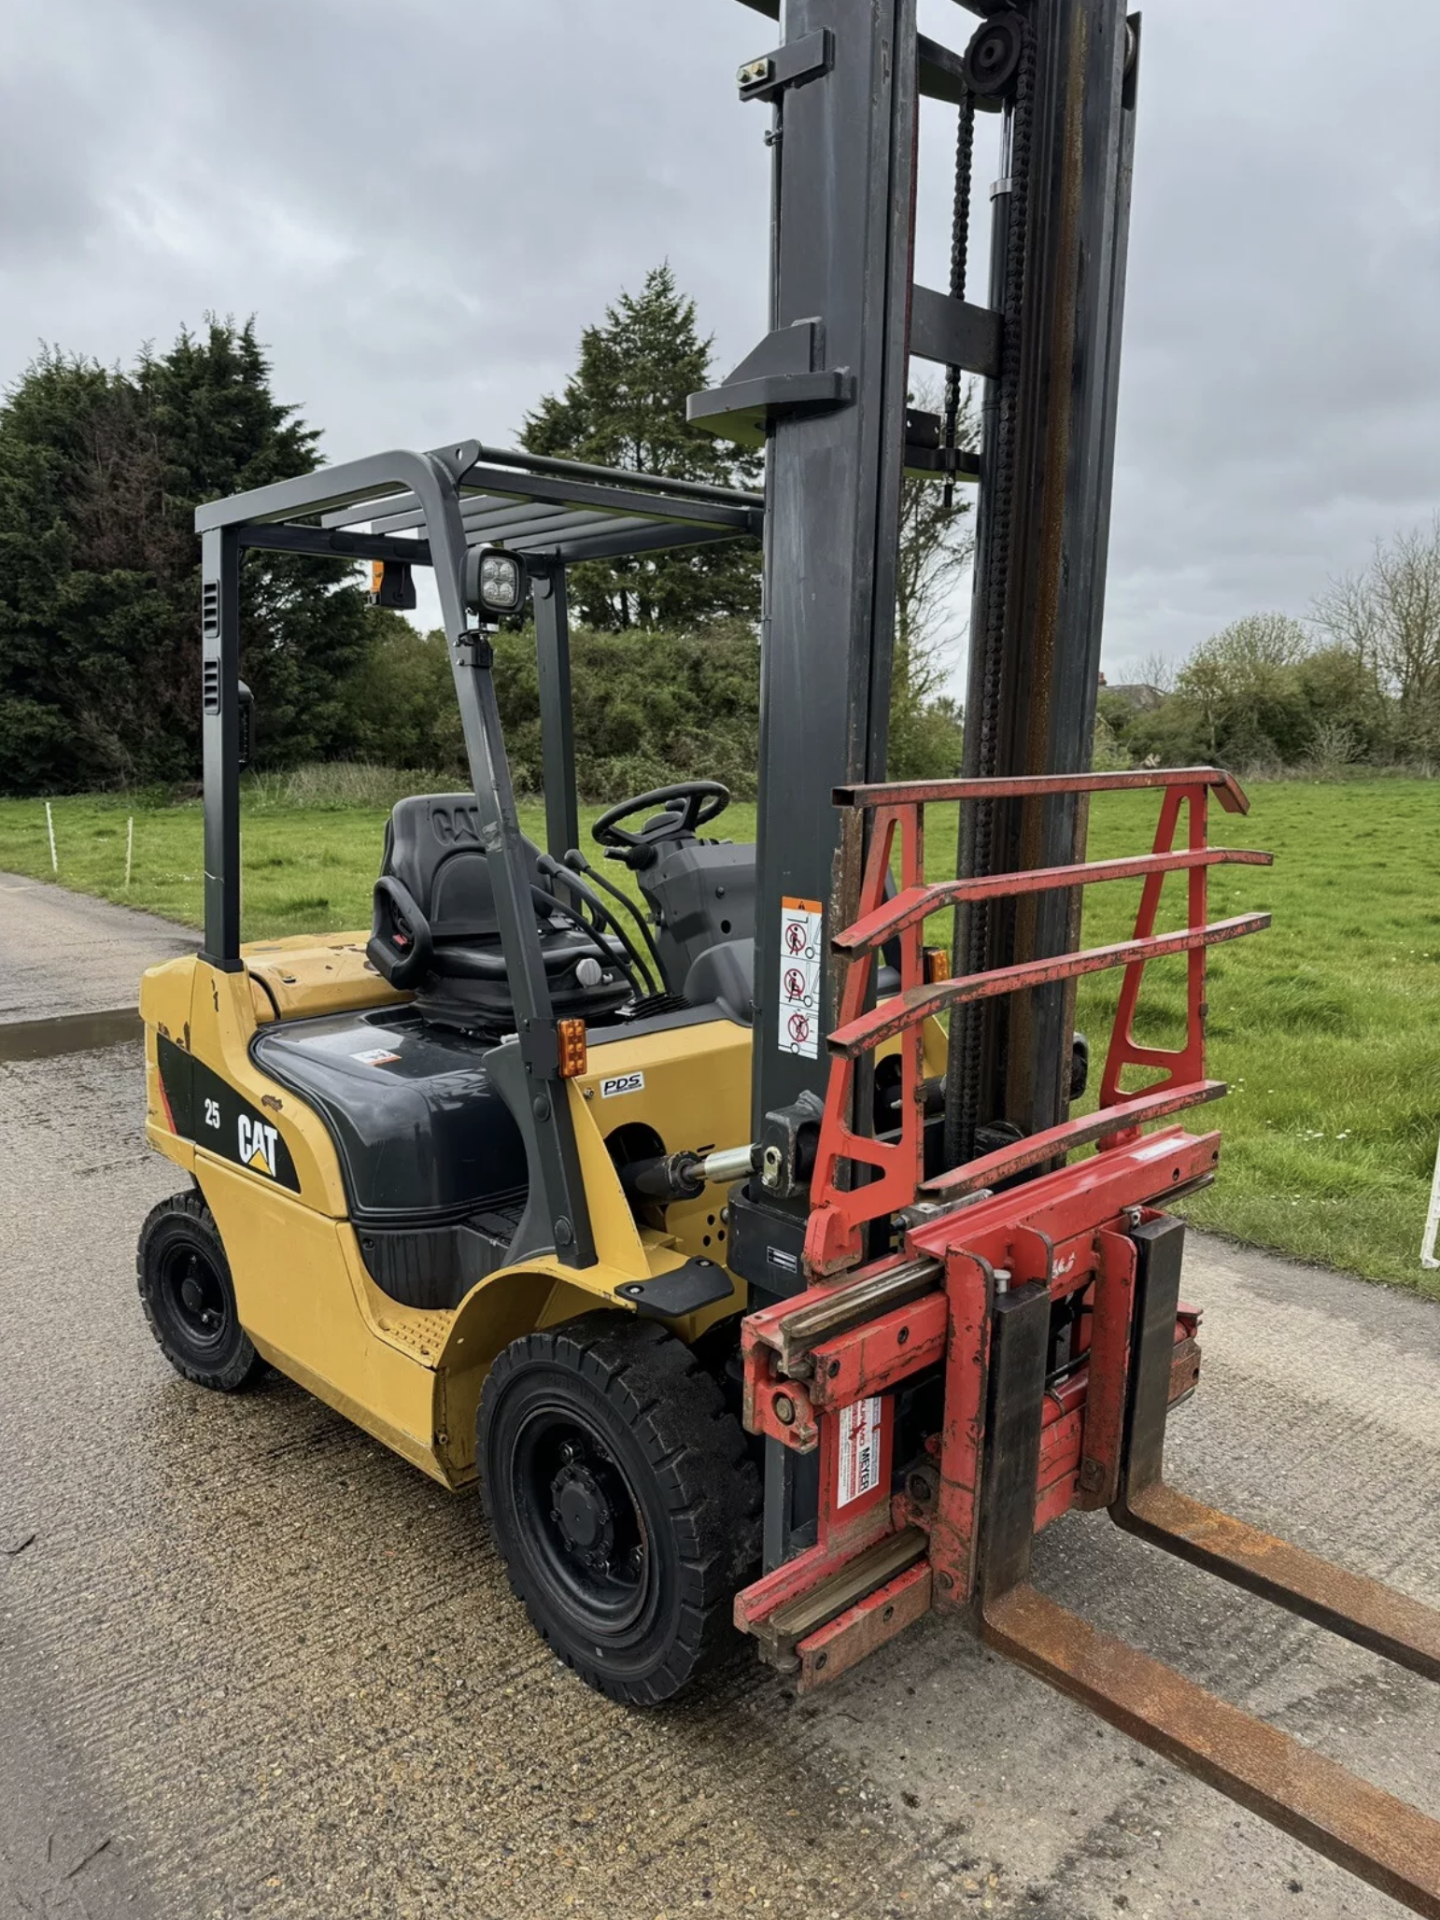 CATERPILLAR, 2.5 Tonne Diesel Forklift - 2500 Hours From New) with fork spreader - Image 2 of 9